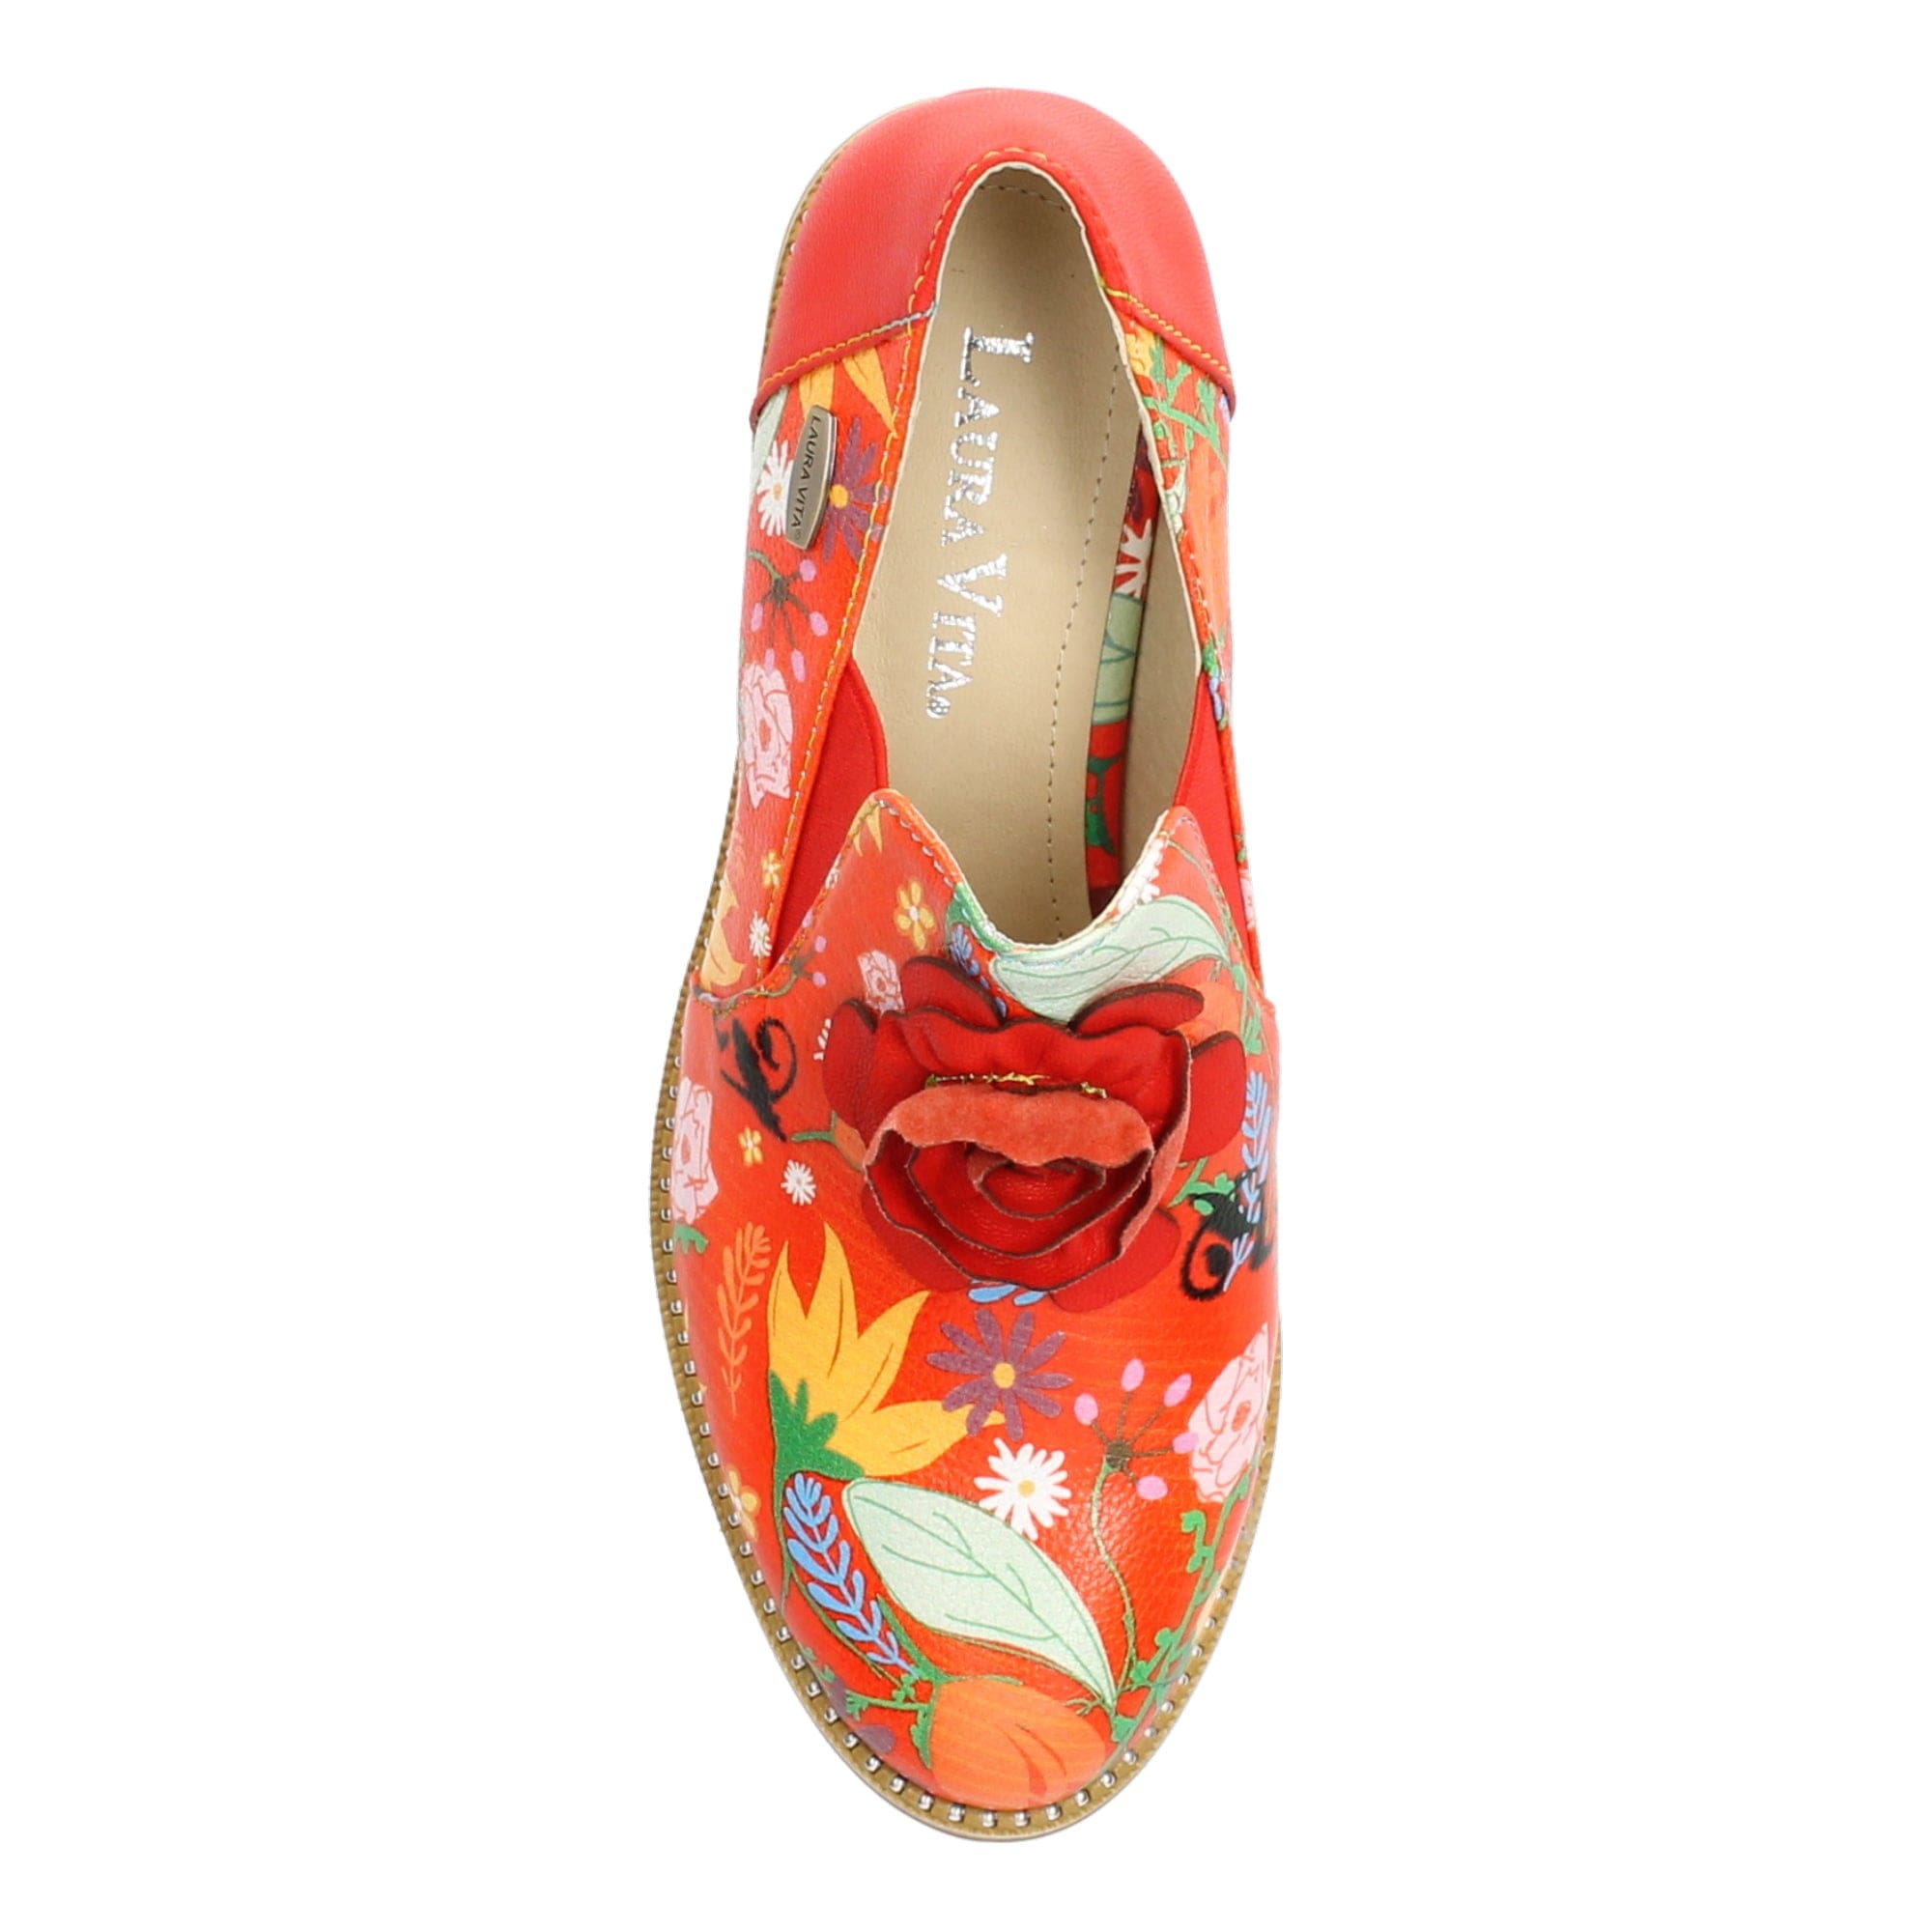 IBCIHALO 011 Flower Shoes - Moccasin